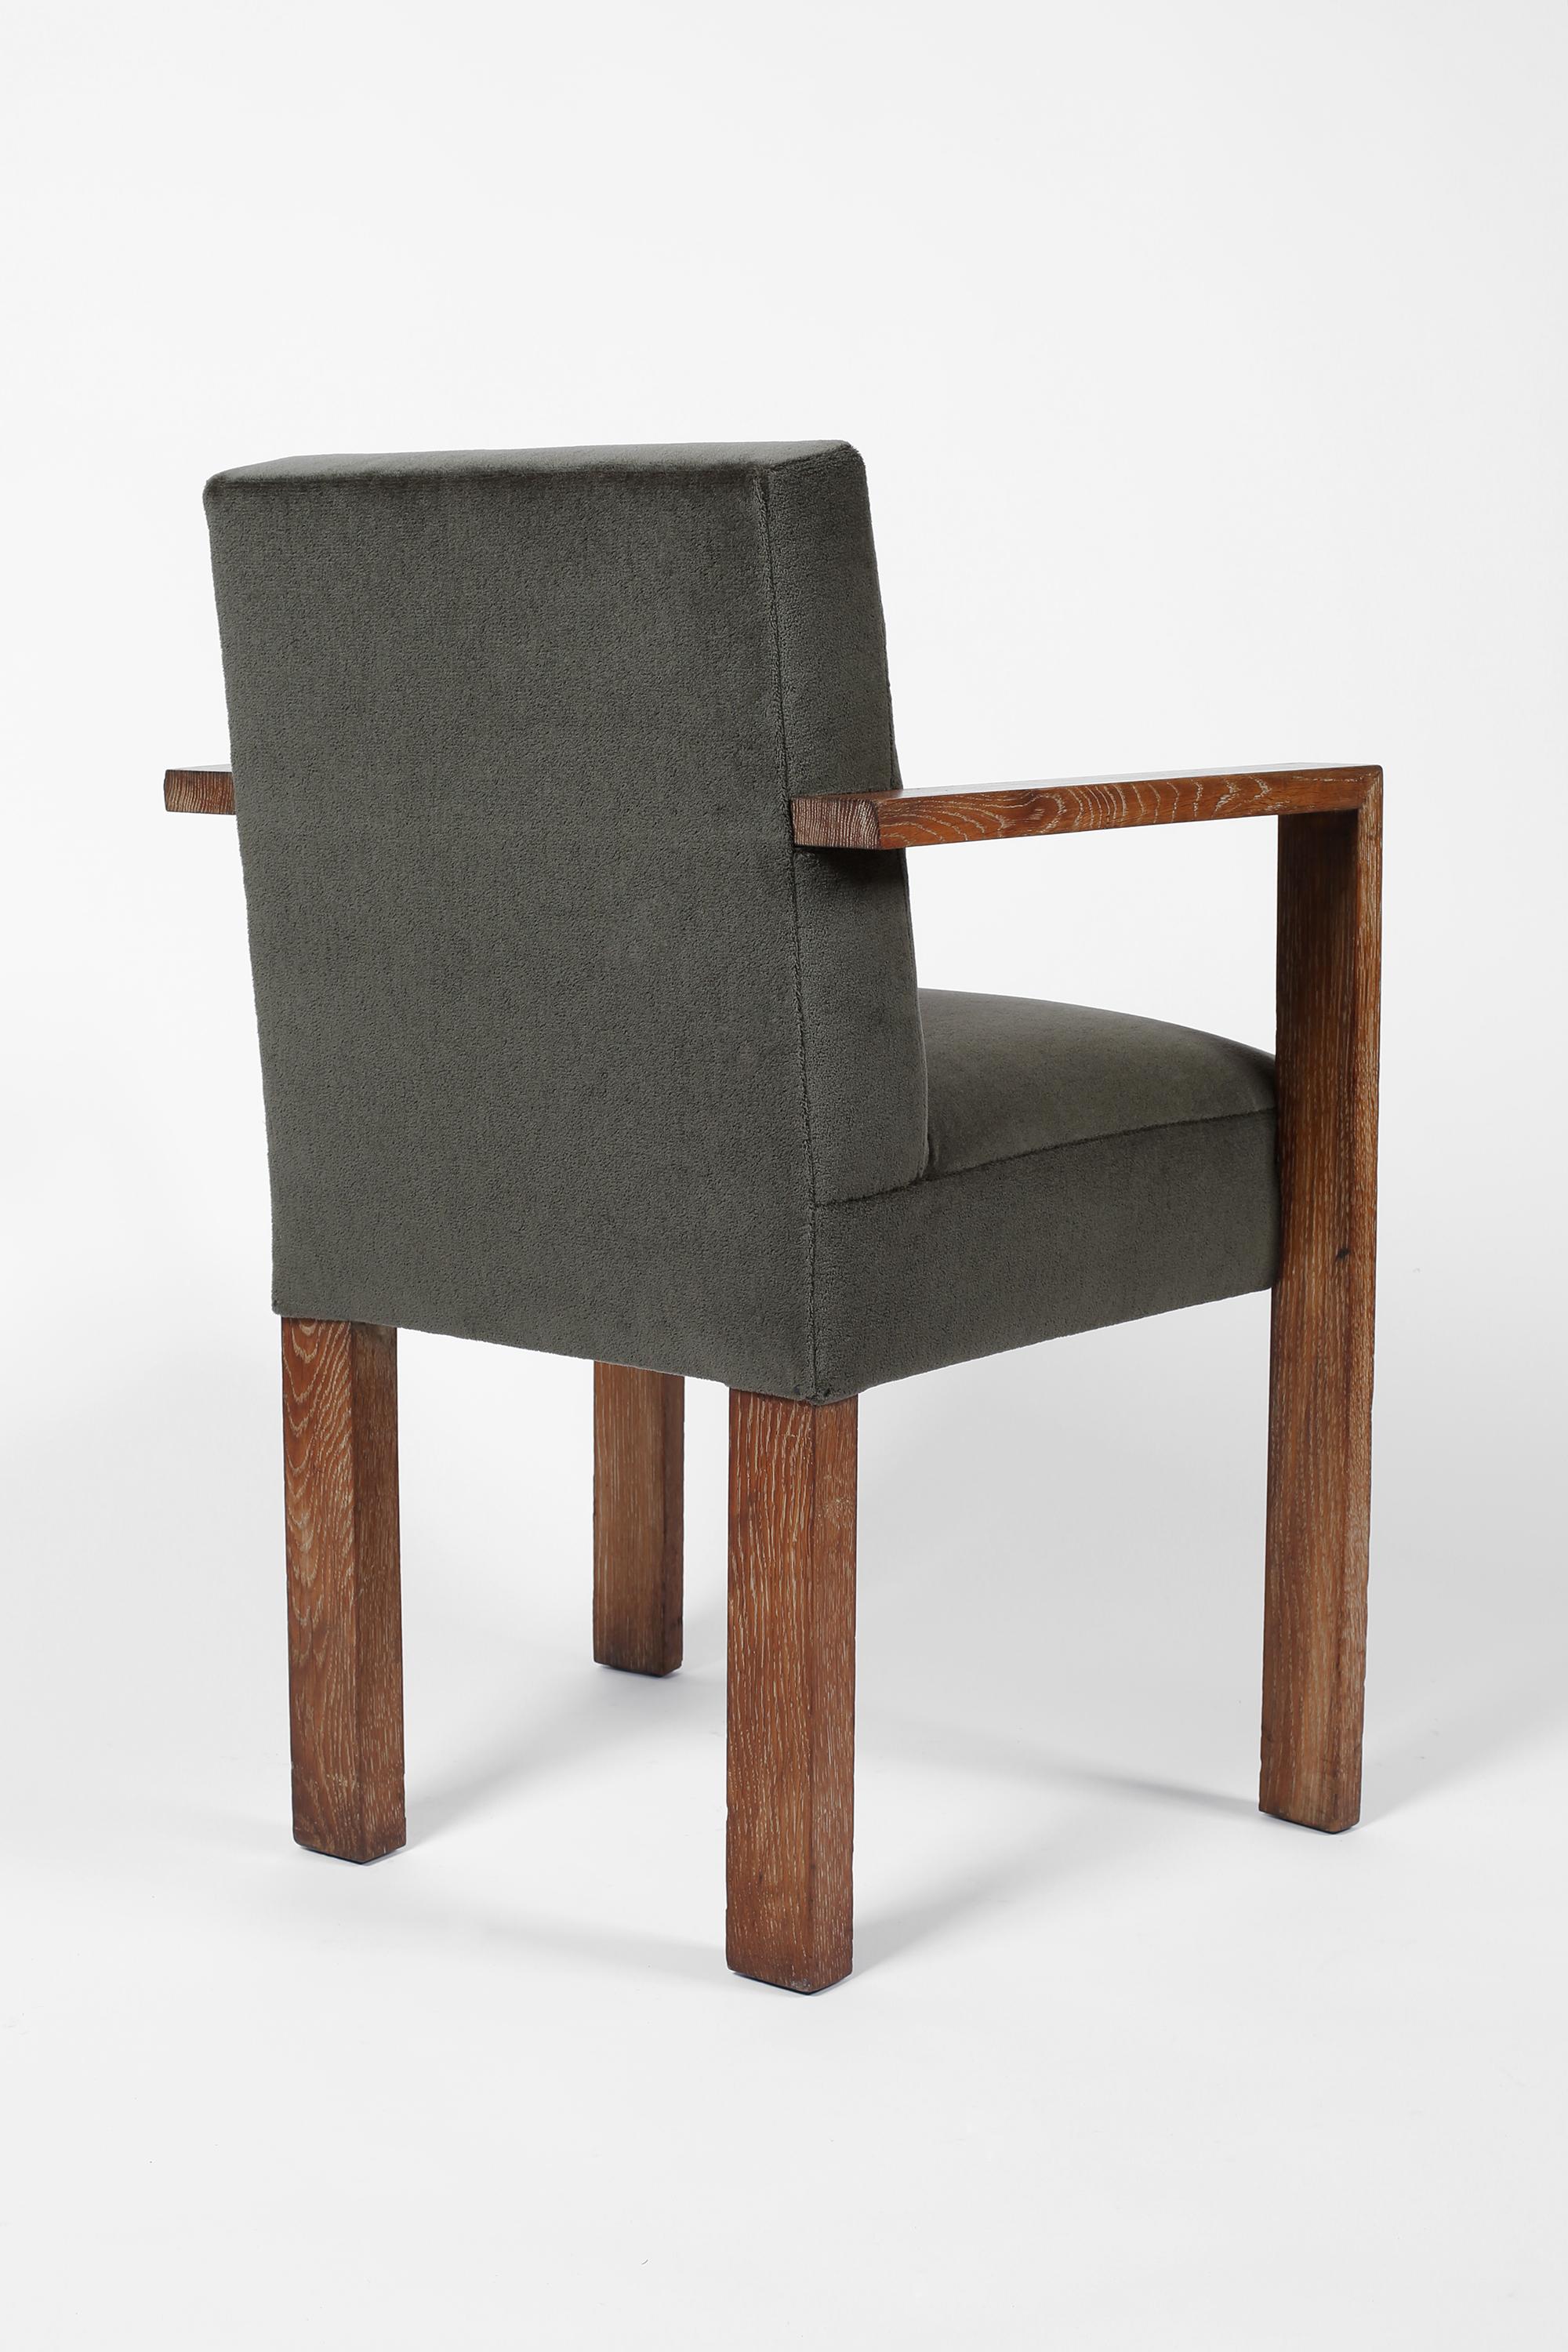 1940s French Modernist Armchair in Limed Oak and Mohair In Good Condition For Sale In London, GB